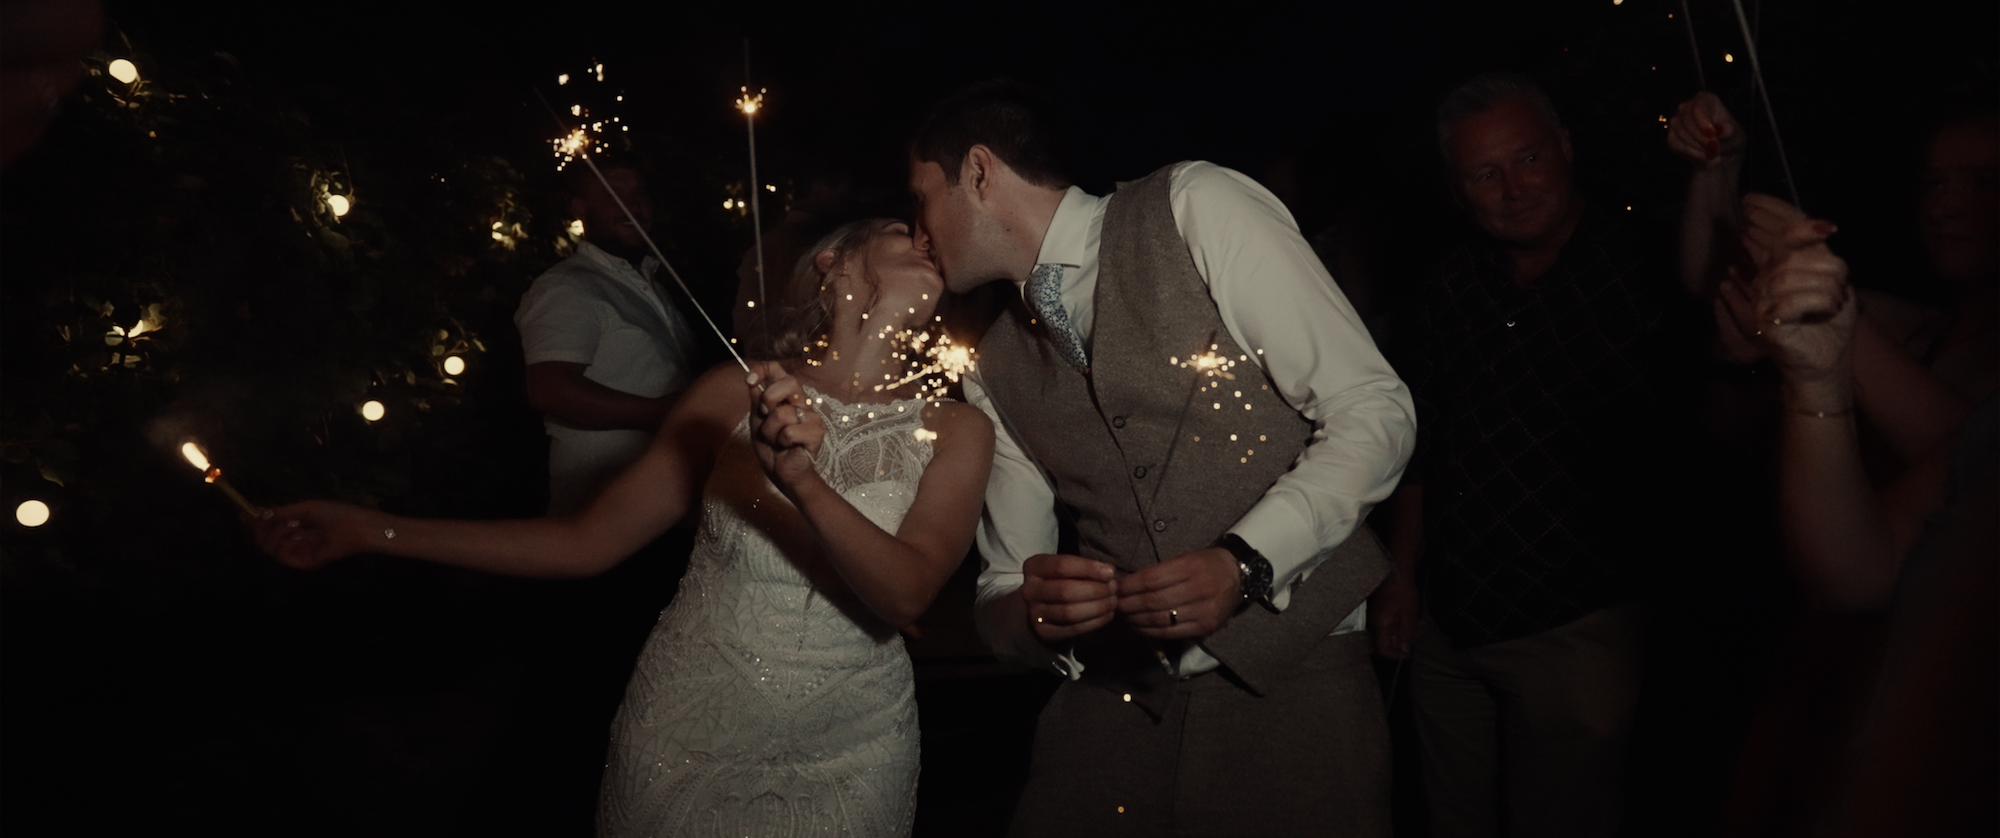 Oxwich Bay Hotel Wedding Videography by Ben Holbrook Films (Swansea South Wales).jpeg6.png